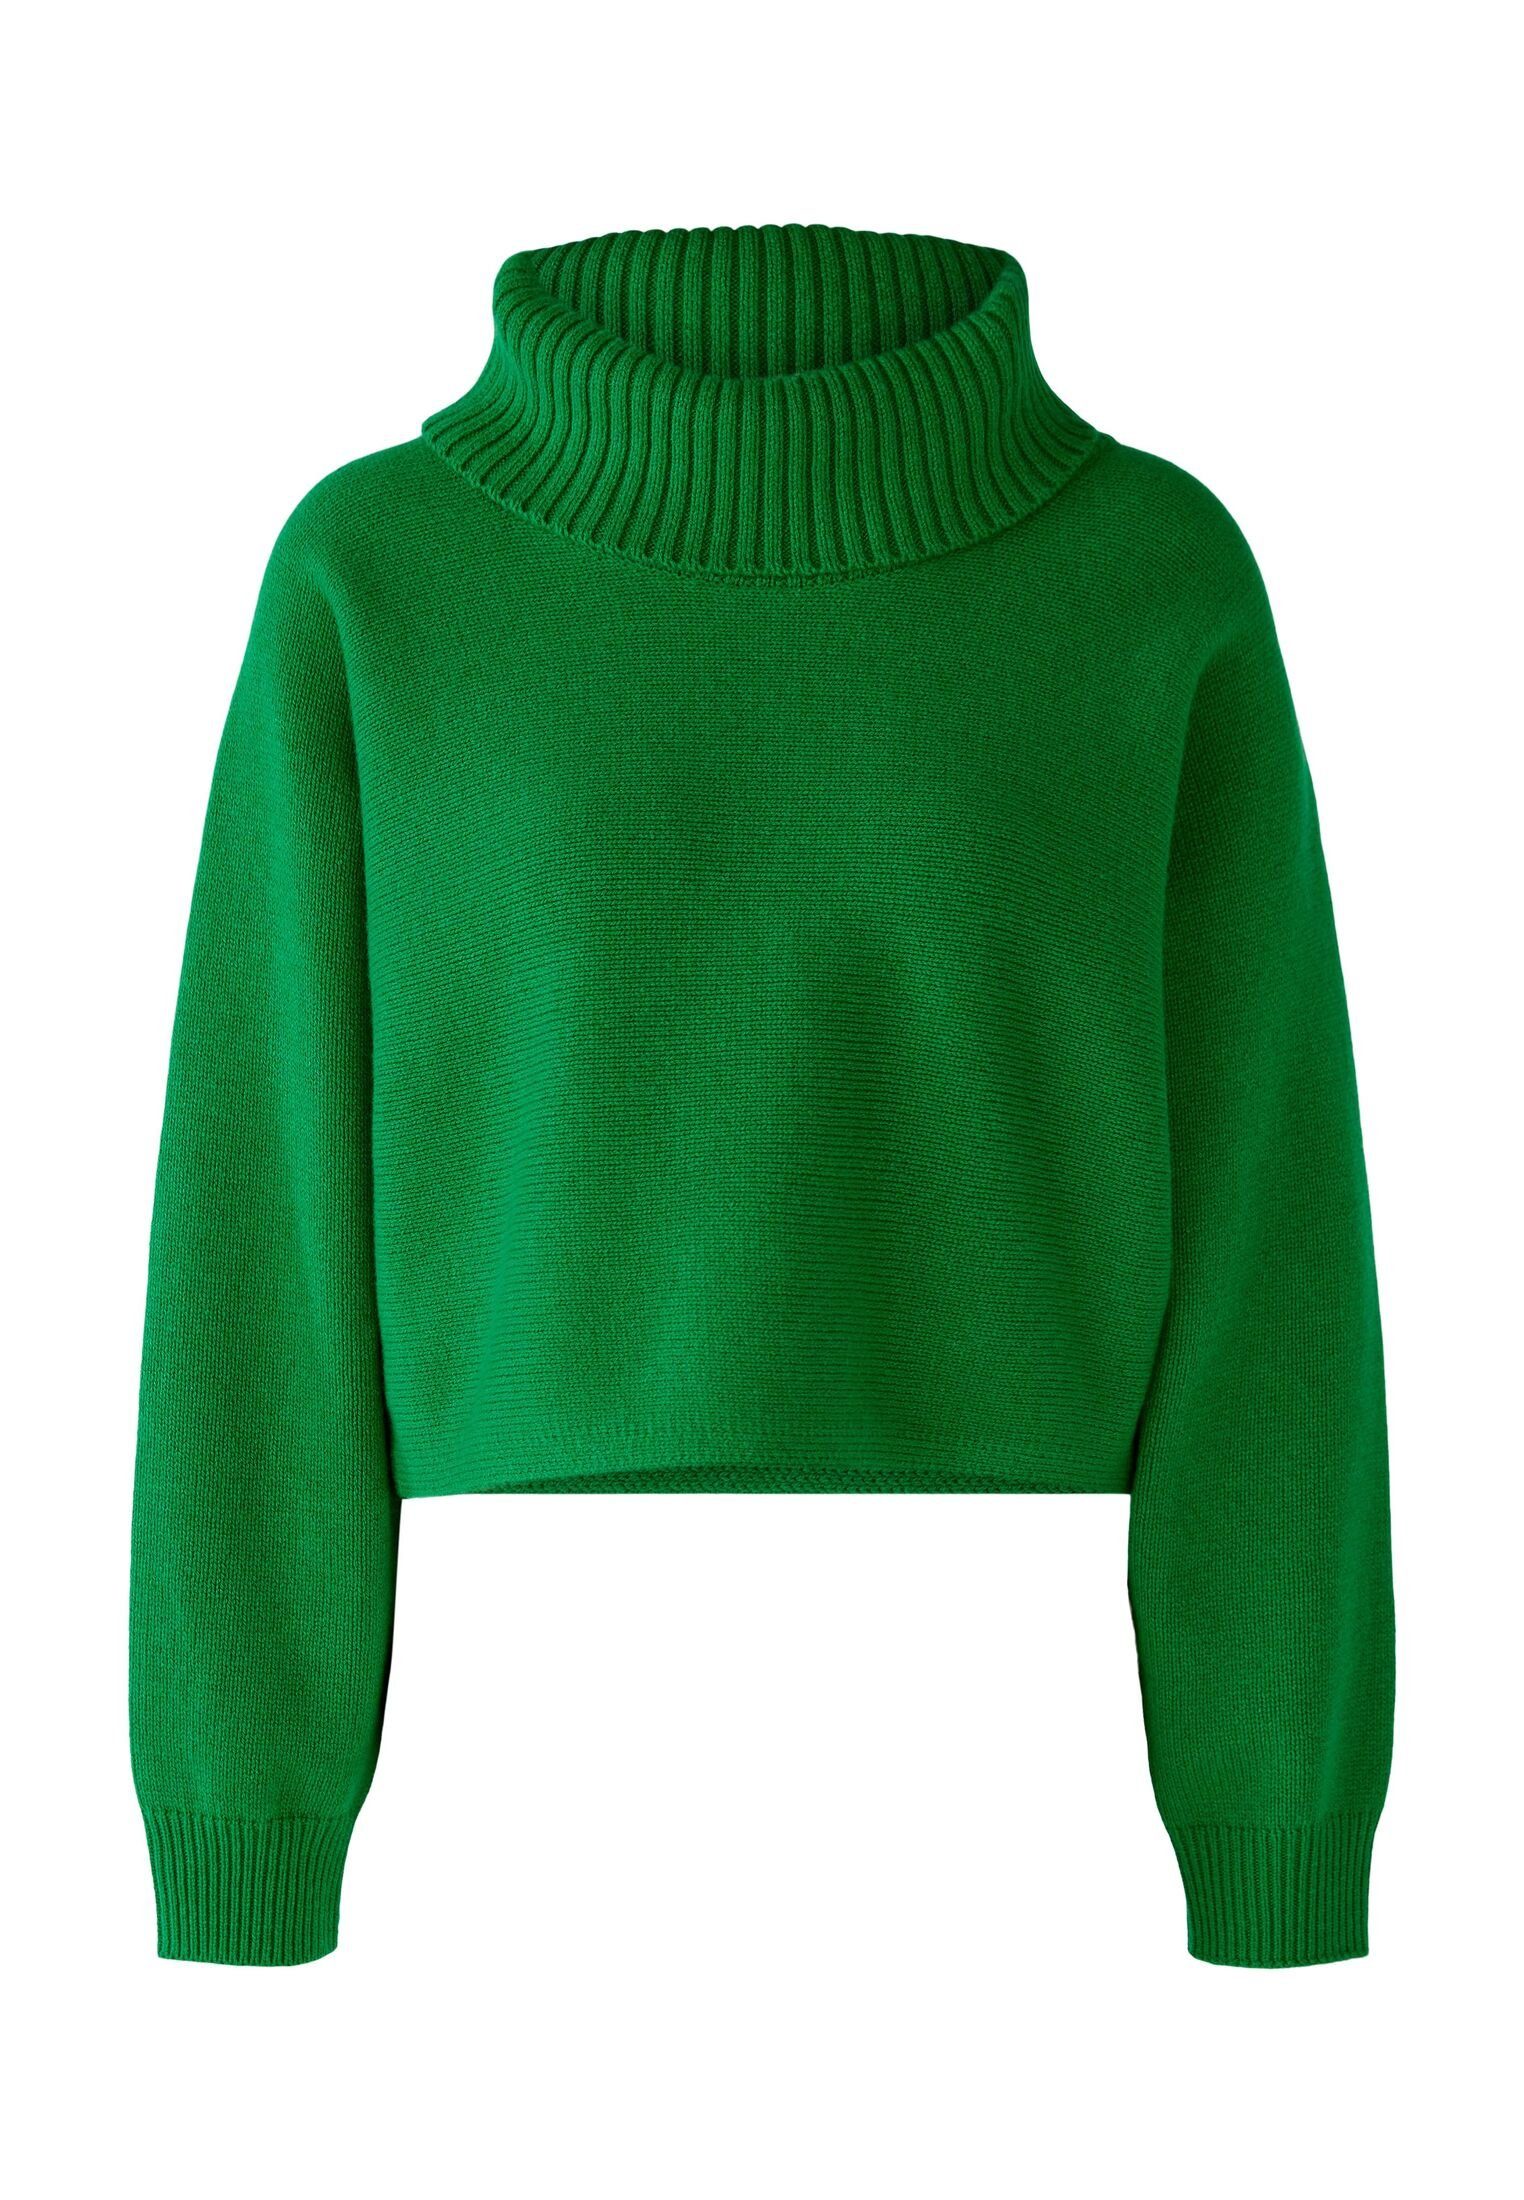 Oui Strickpullover Pullover Wollmischung green | 